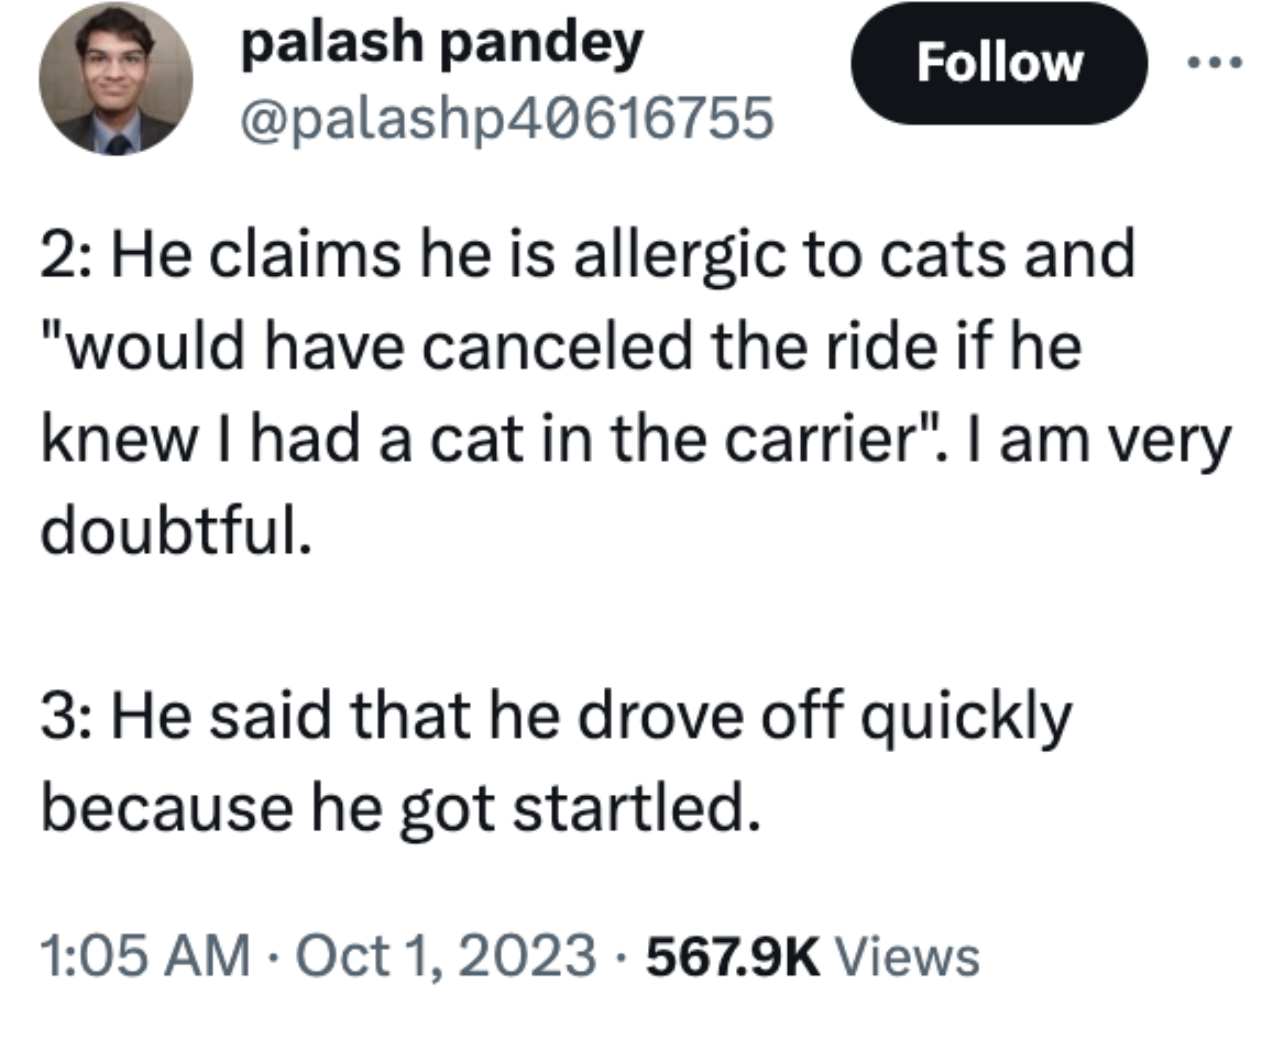 Lyft Driver Speeds Off With Passenger's Cat Still In His Backseat